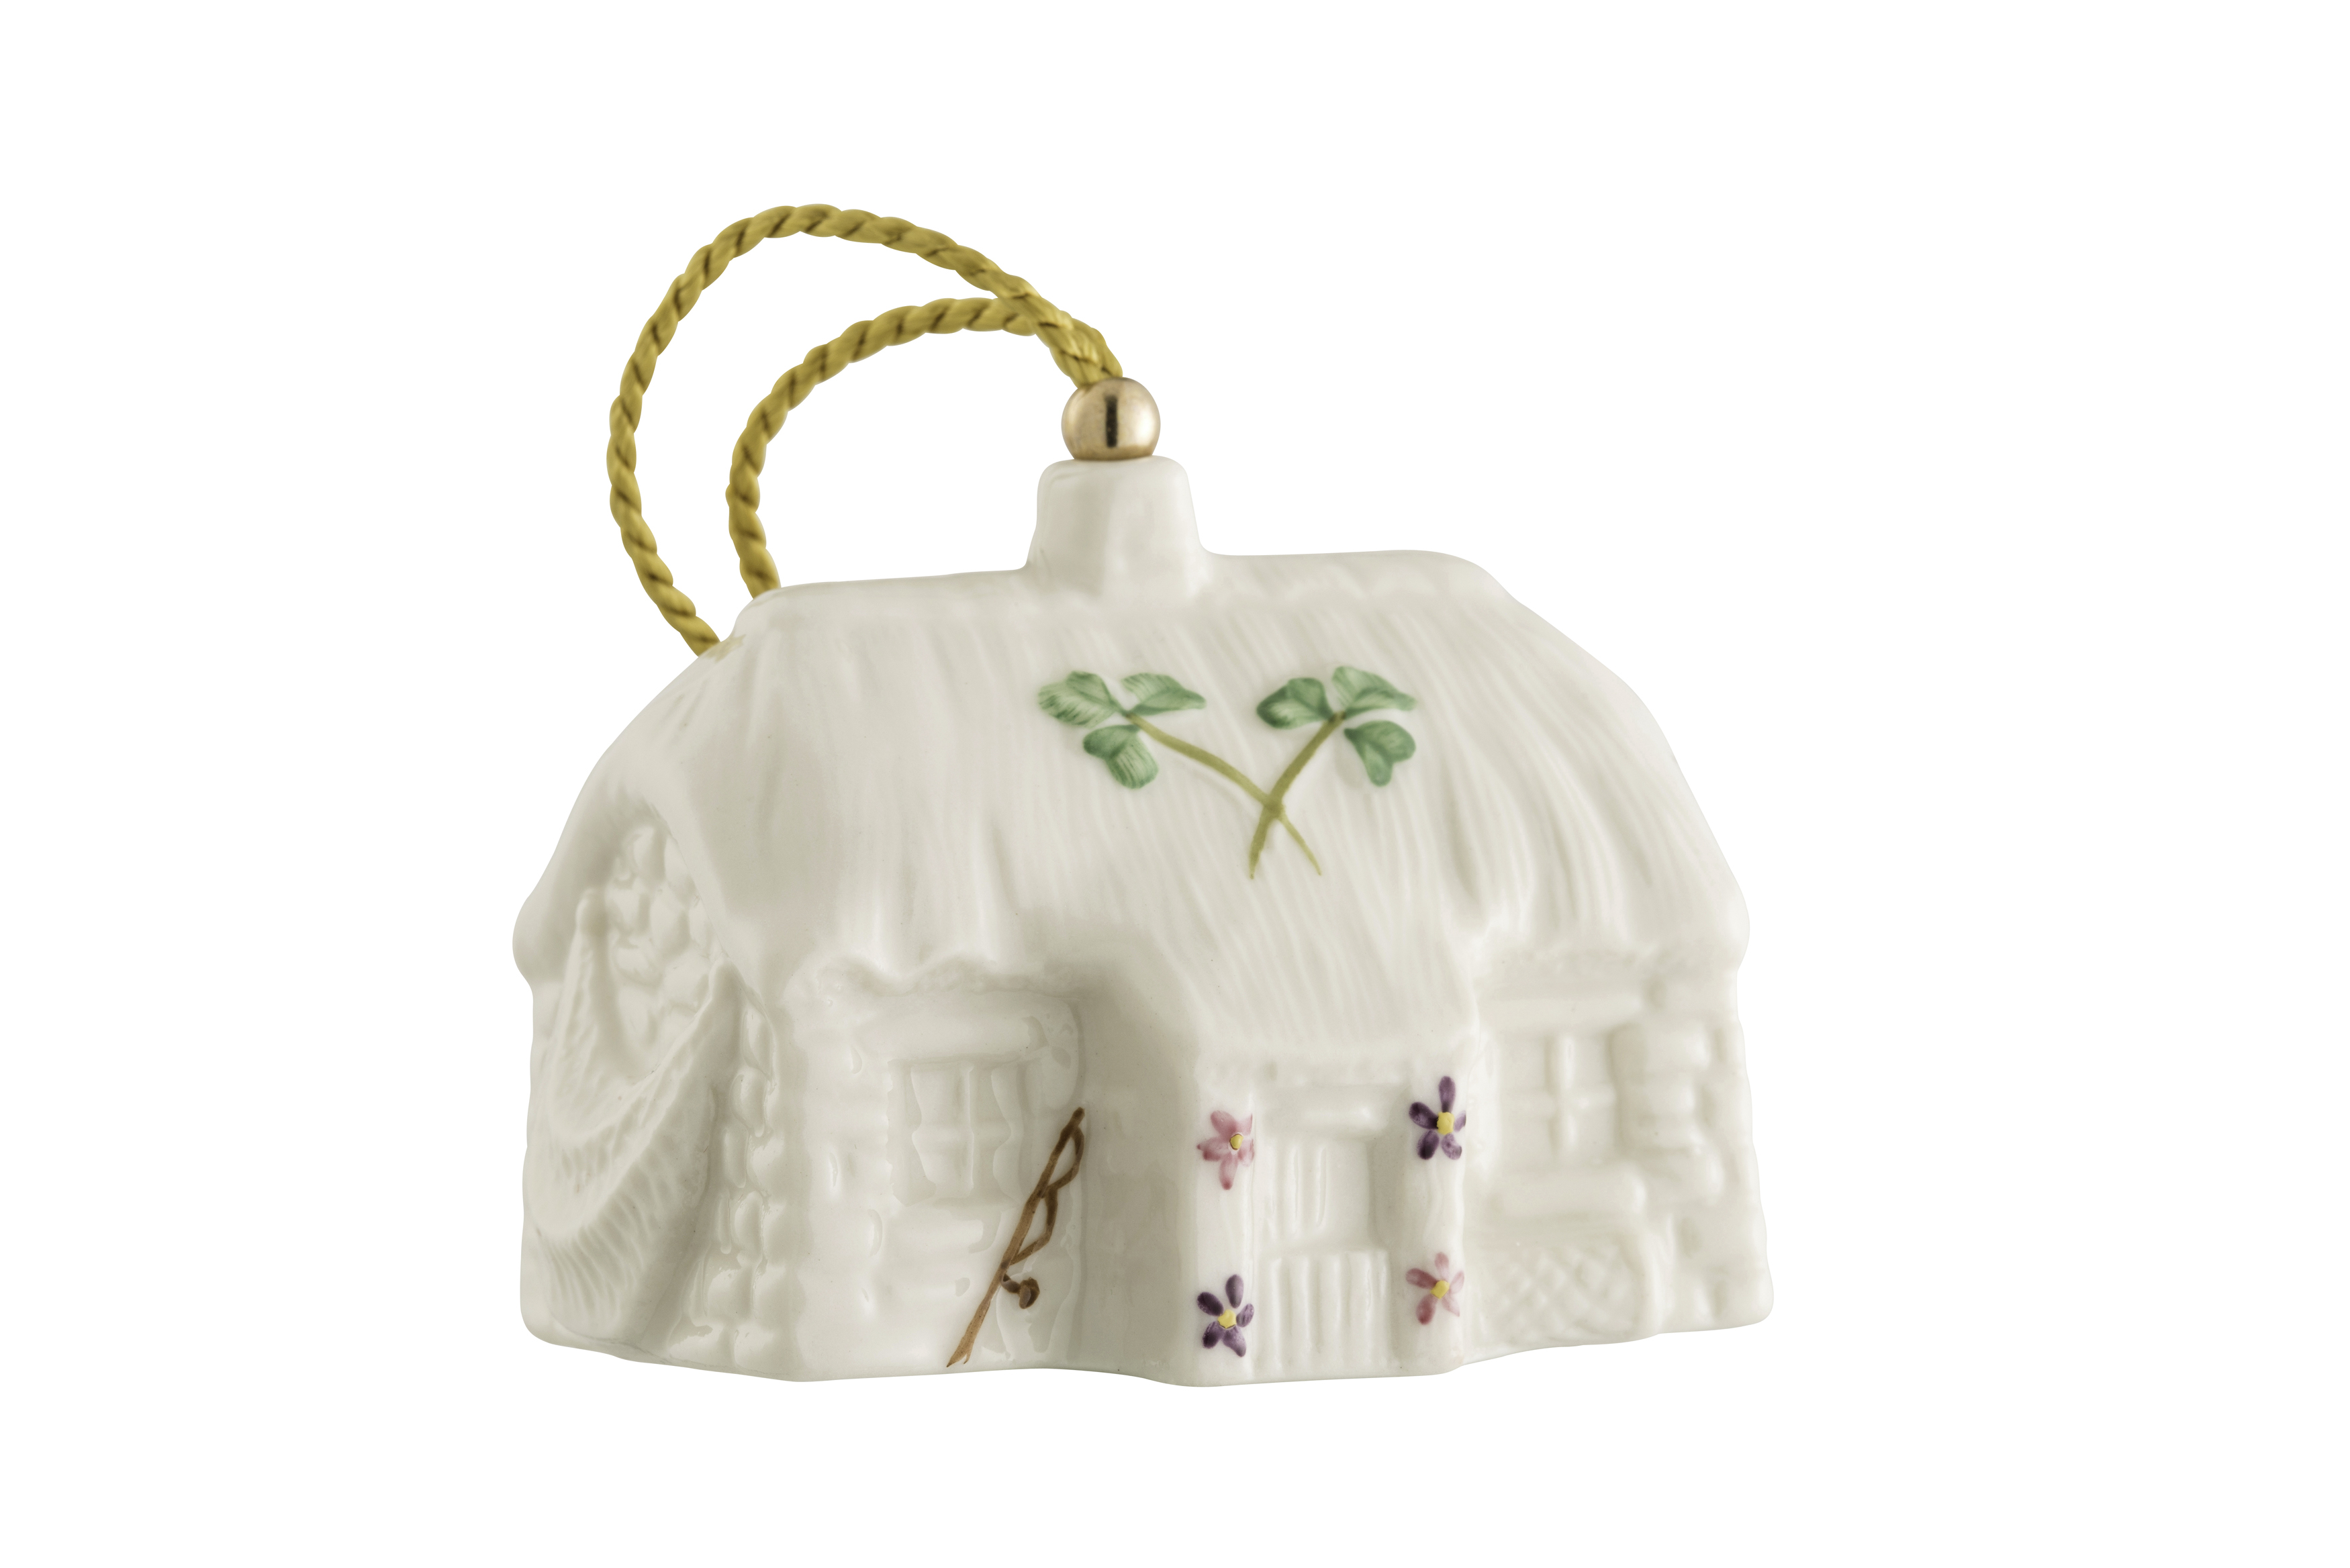 Product image for Irish Christmas - Belleek Killybegs Fisherman's Cottage Annual Ornament 2017